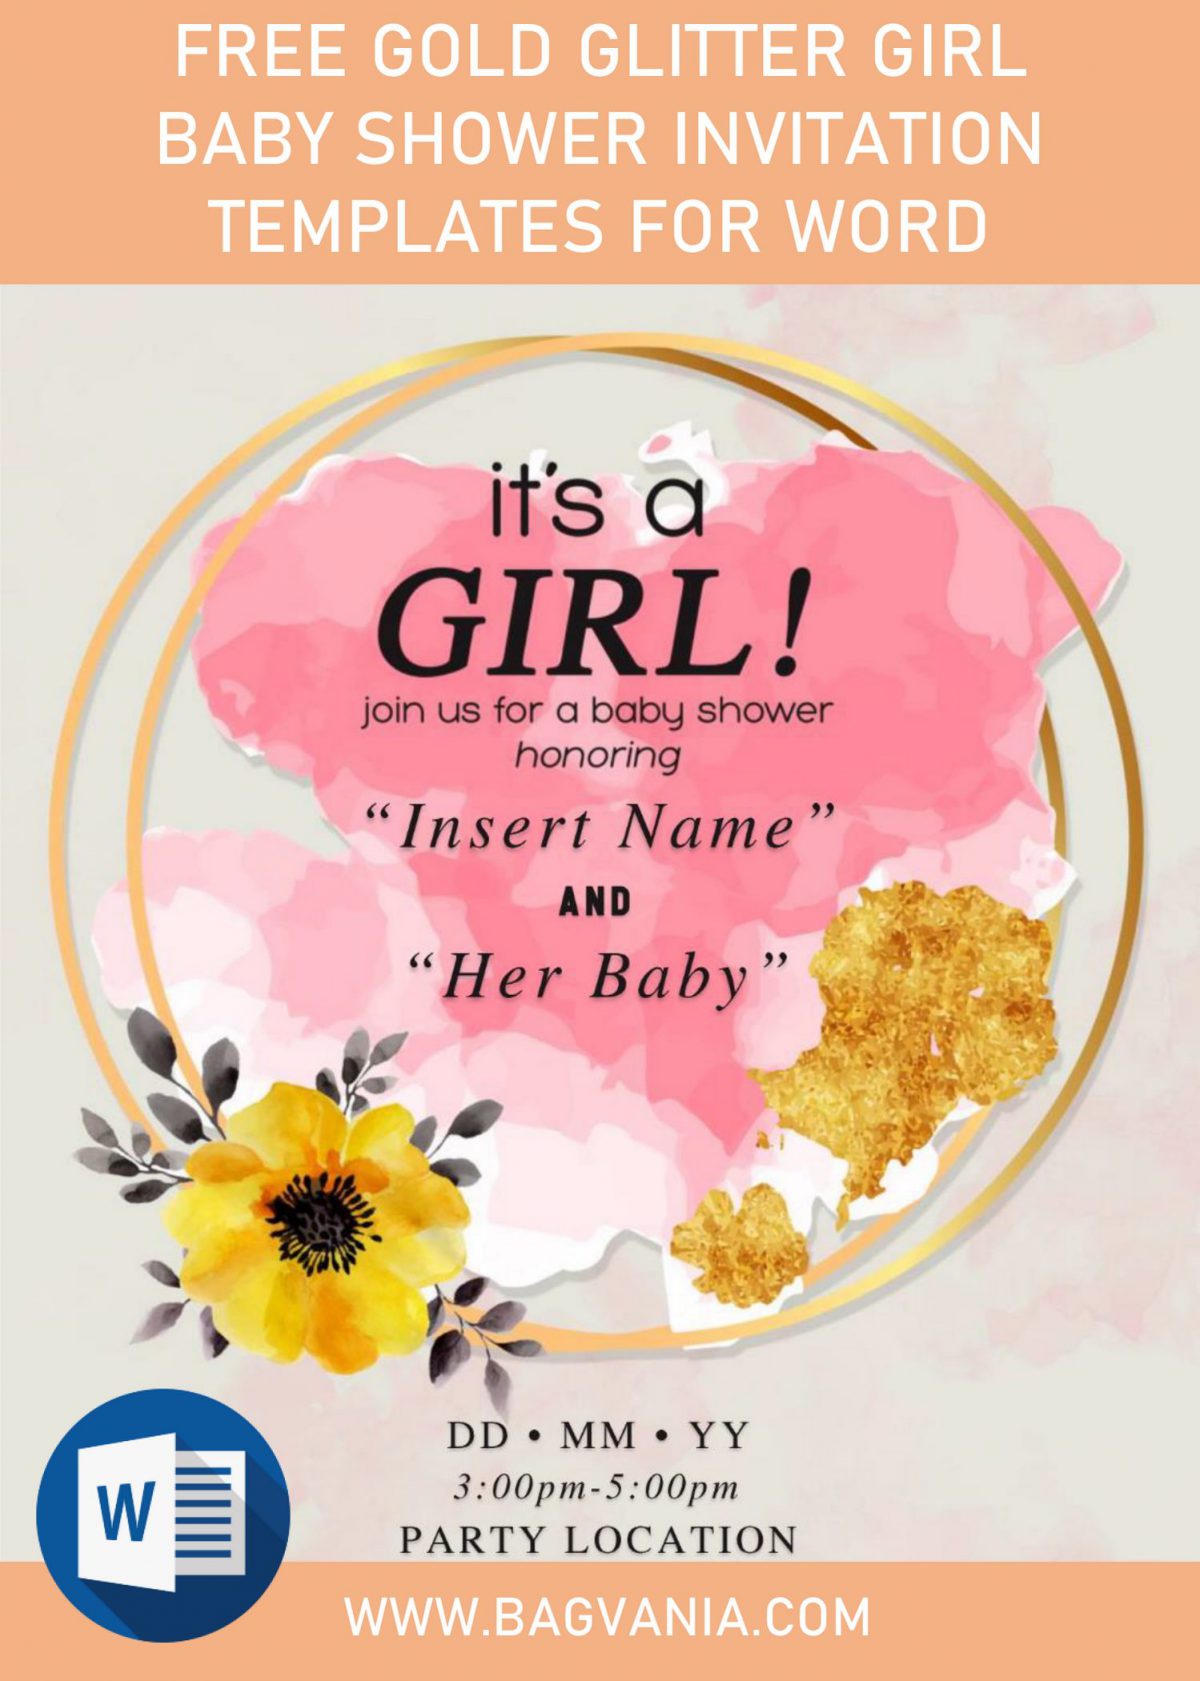 Free Gold Glitter Girl Baby Shower Invitation Templates For Word